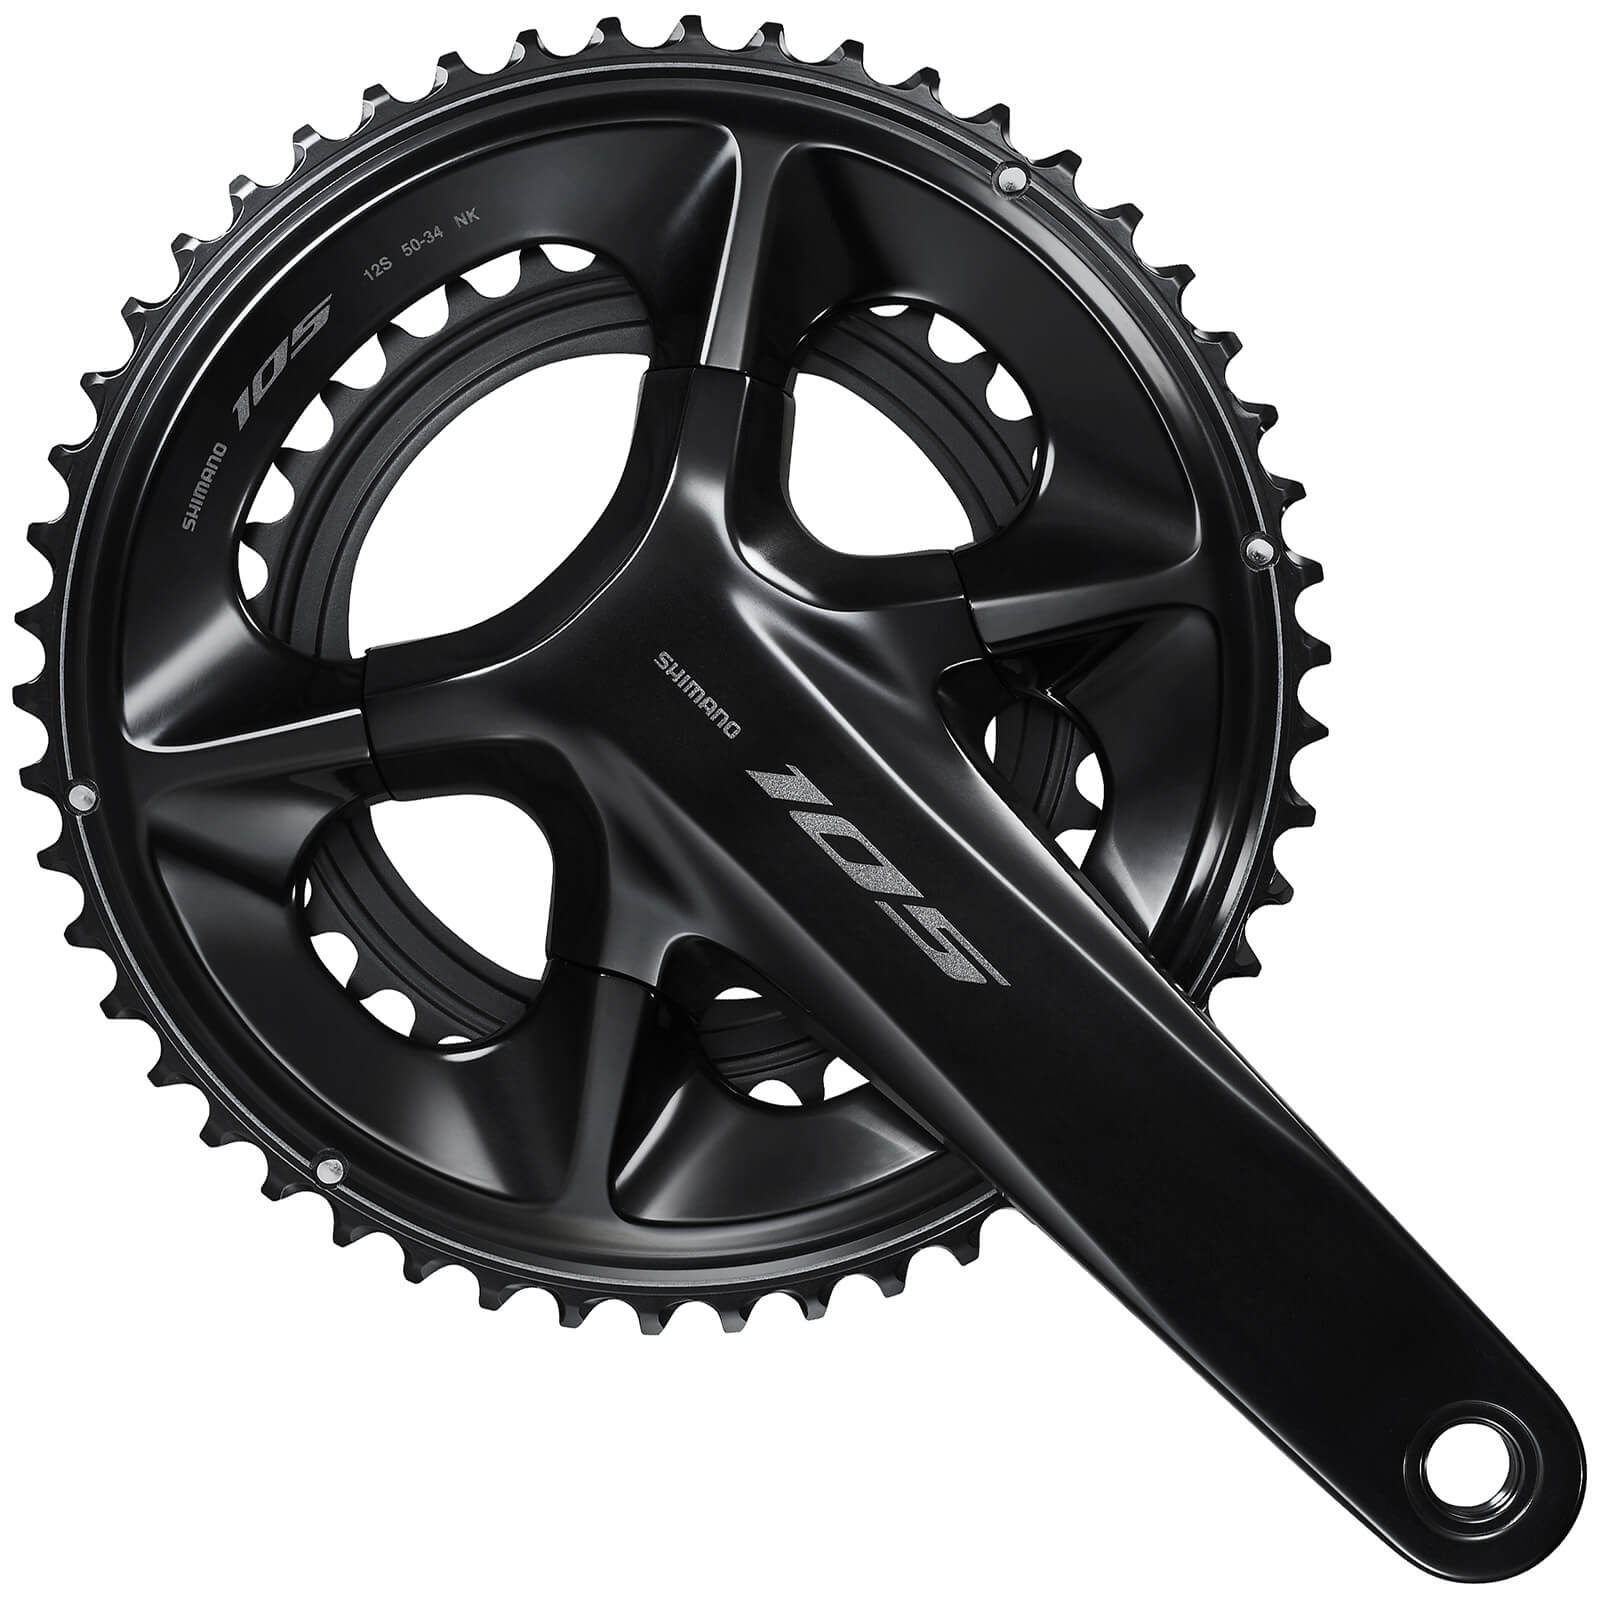 Shimano 105 FC-R7100 12 Speed Chainset - 165mm - 50/34